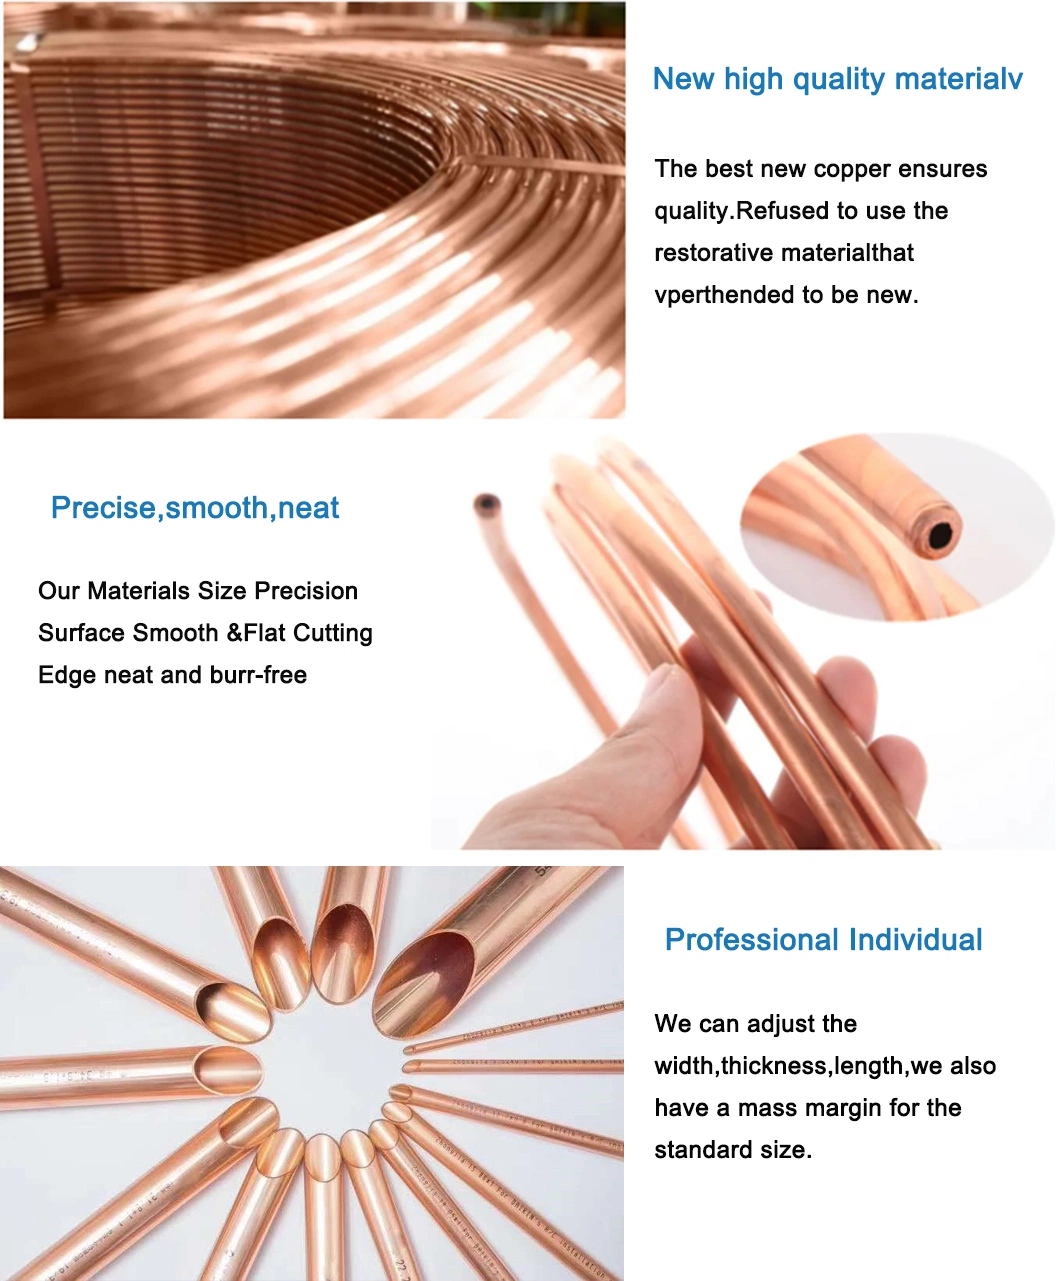 Cold Drawn Seamless Straight Pure Copper Heat Tube with Cheap Price